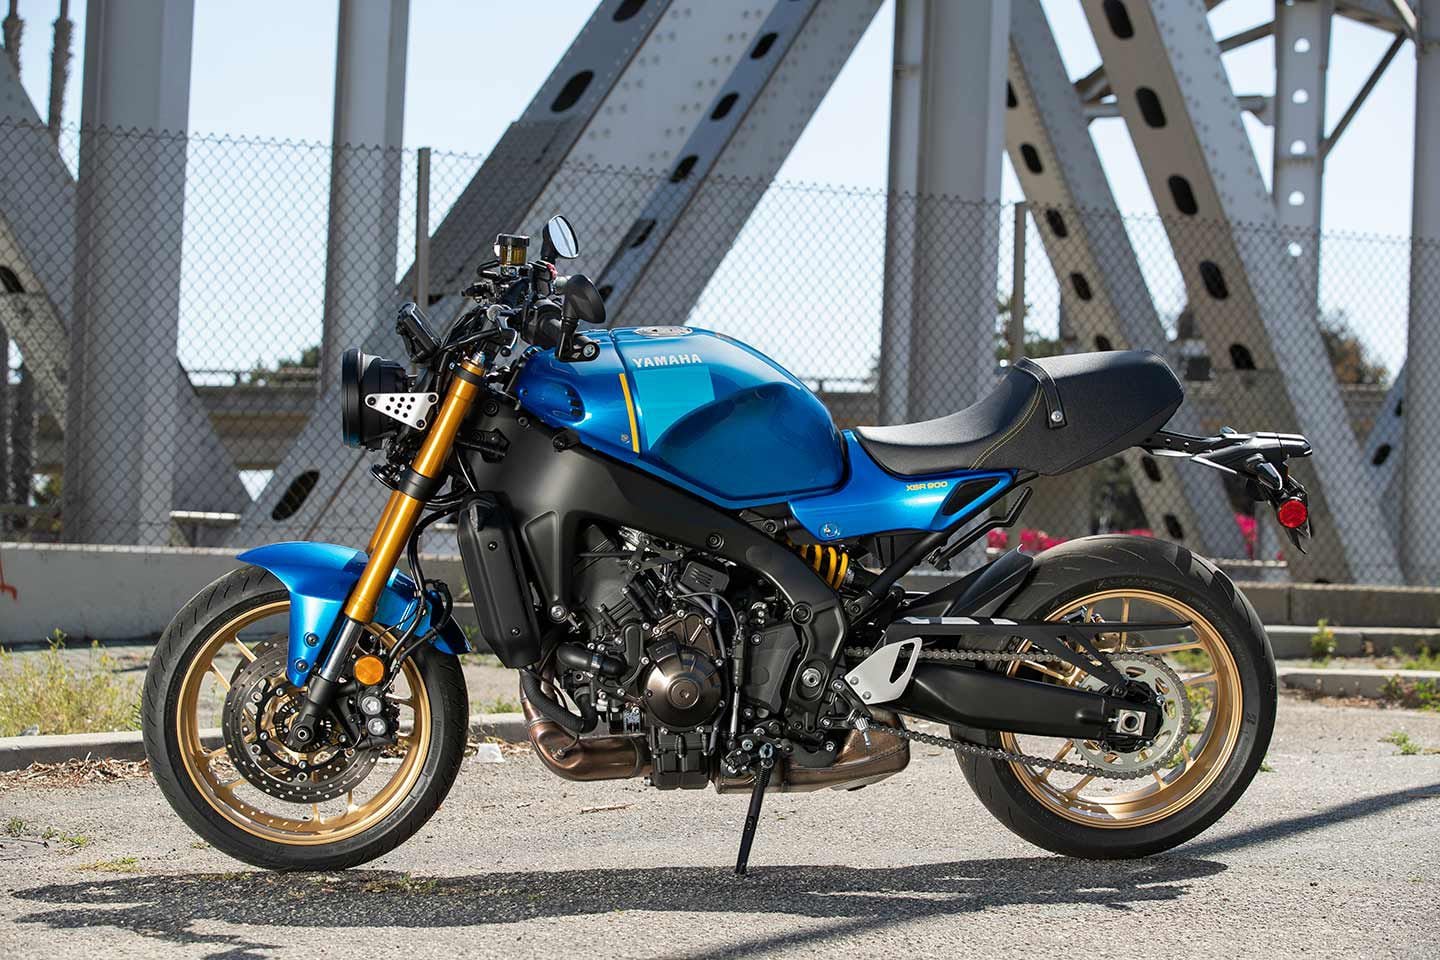 The XSR900 is a more refined package than the first generation, but it still knows how to have a good time.